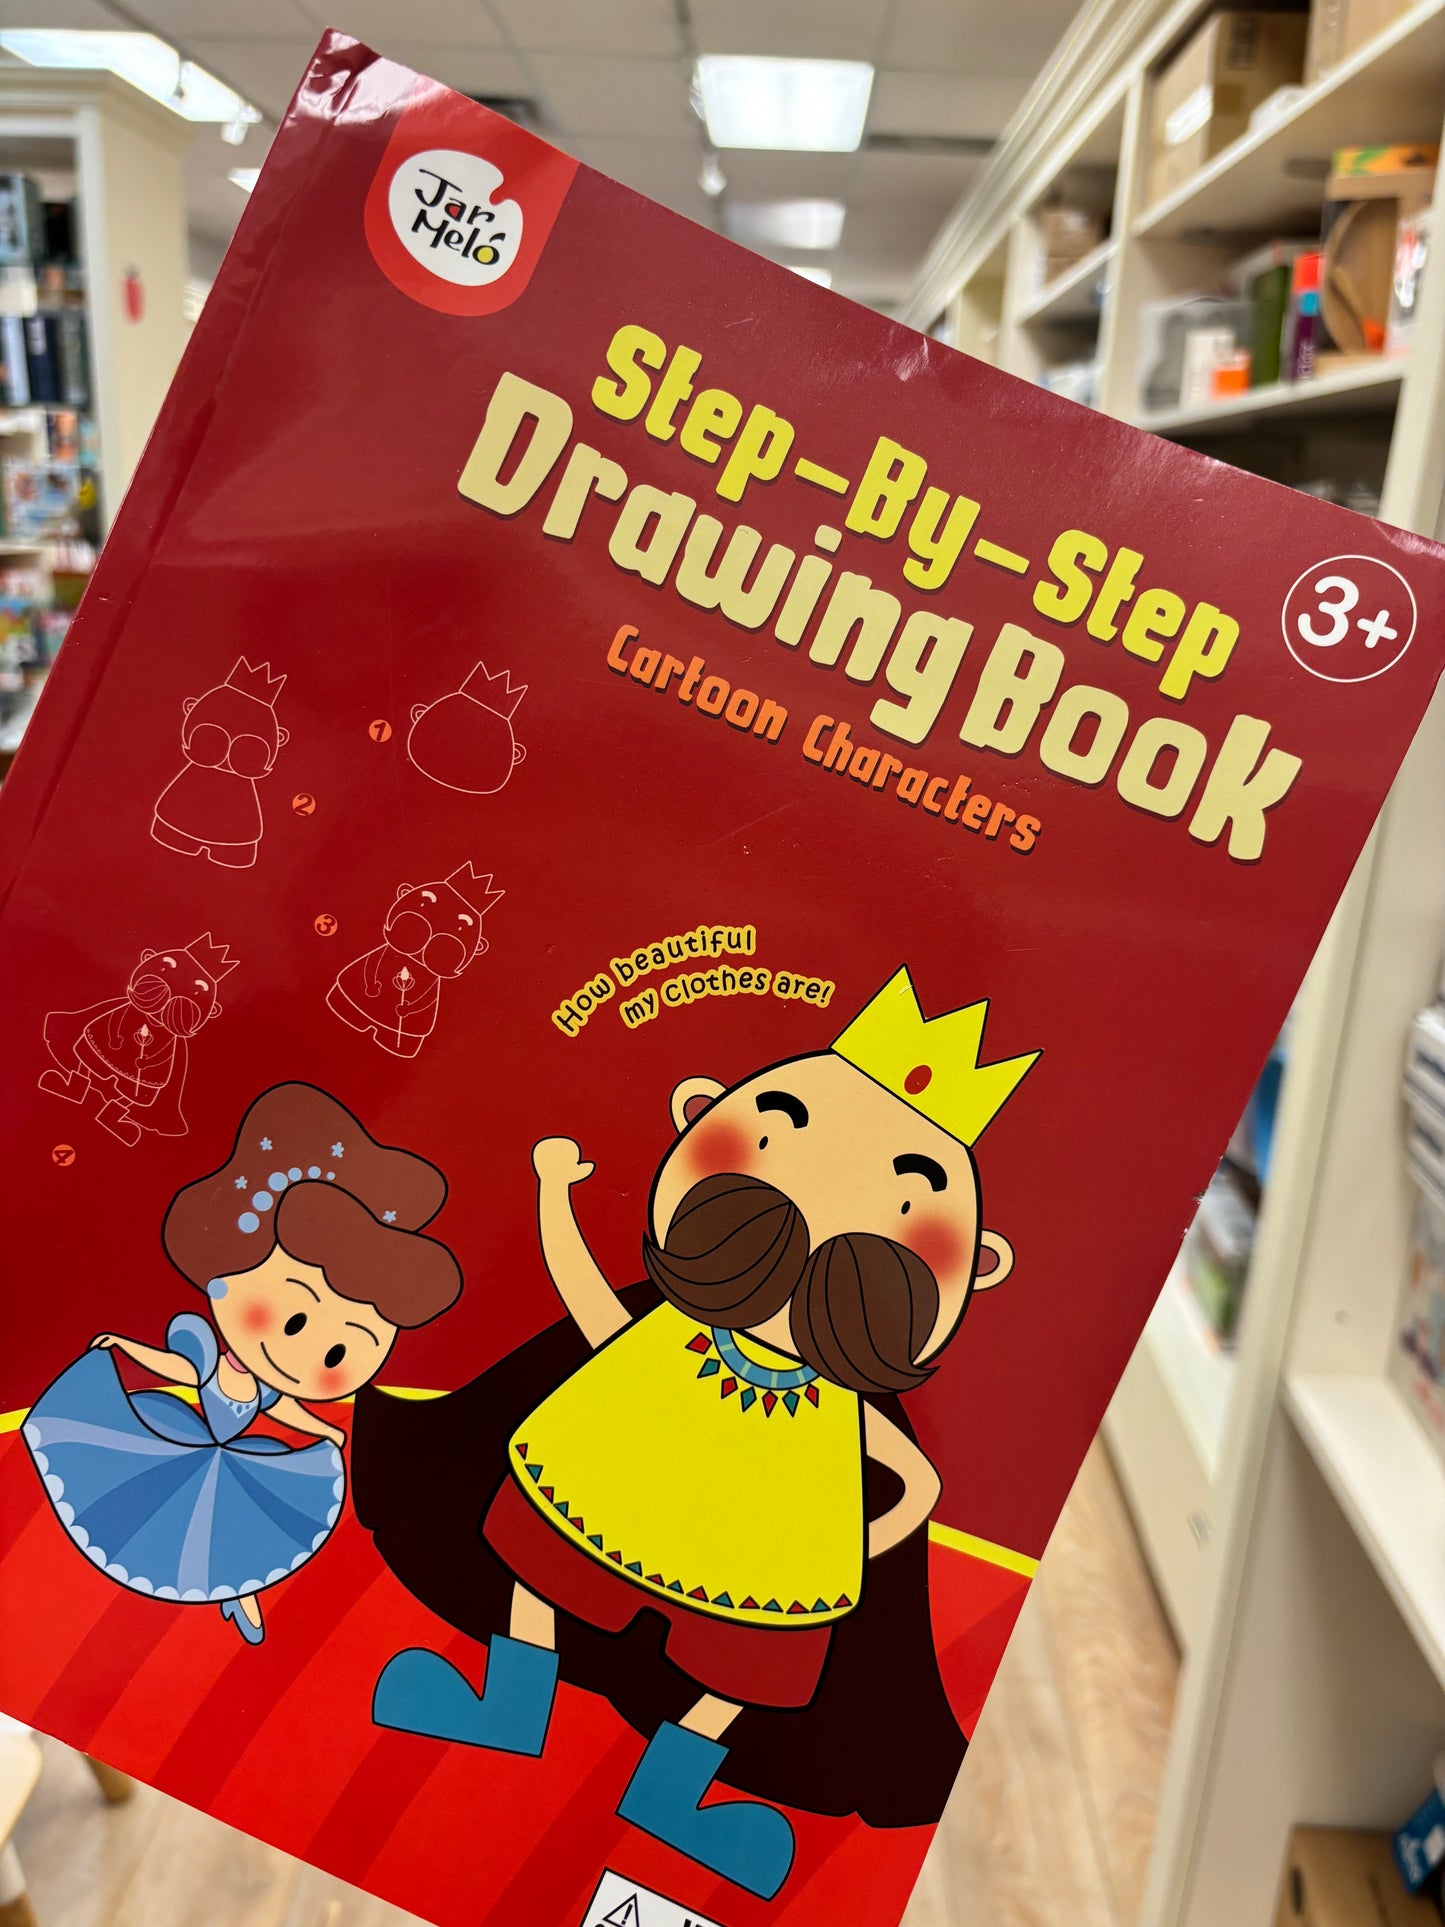 JARMELO STEP BY STEP DRAWING BOOK